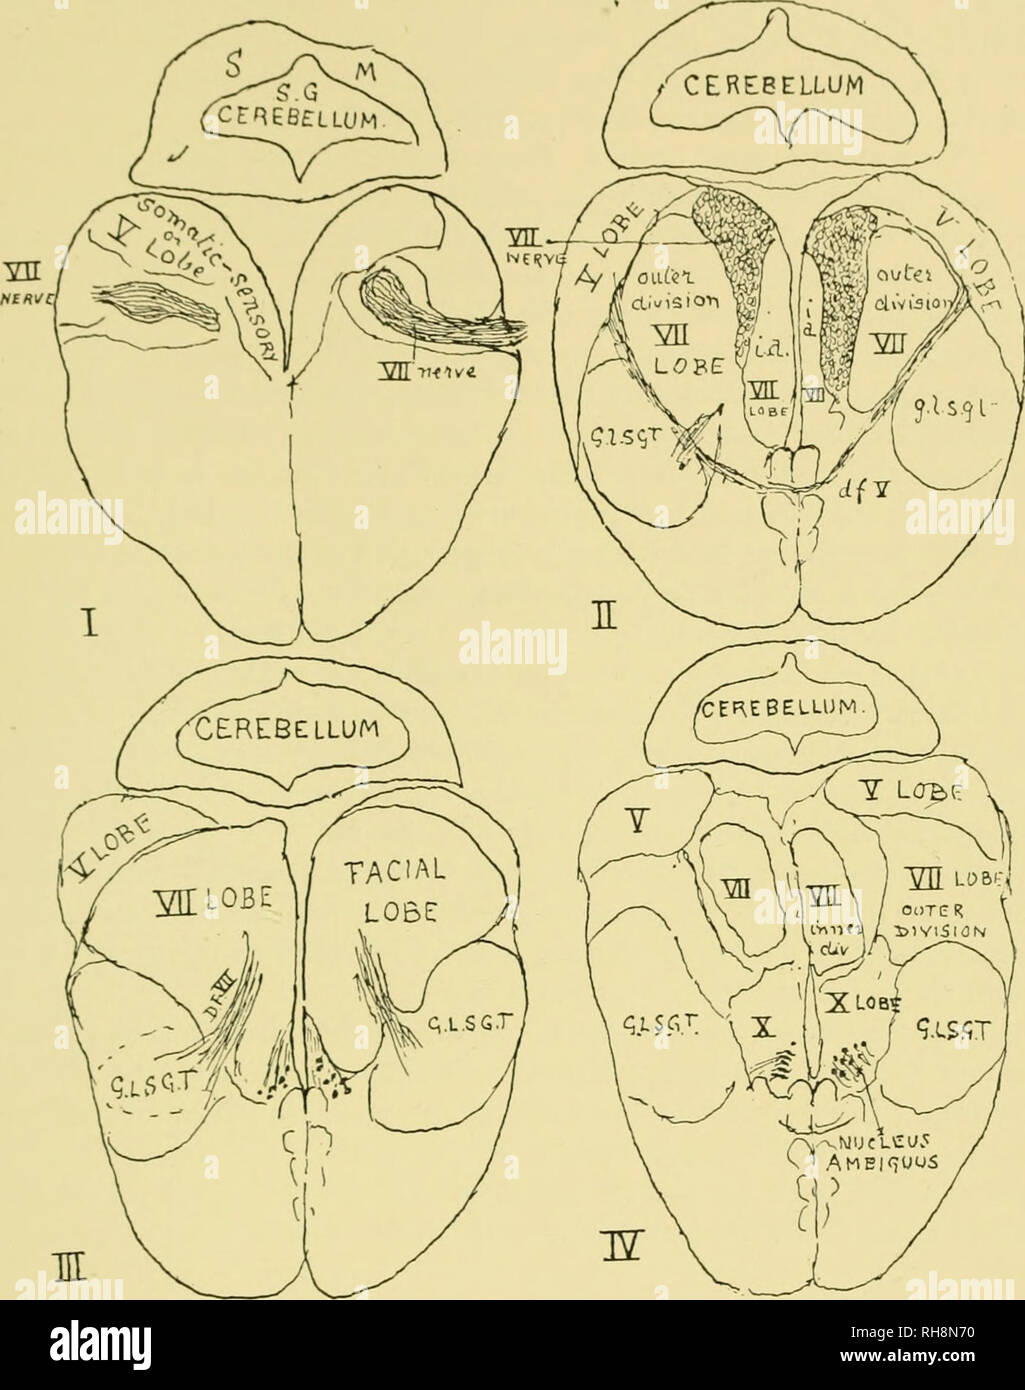 . Brain and body of fish; a study of brain pattern in relation to hunting and feeding in fish. Fishes -- Anatomy; Nervous system -- Fishes; Brain. THE COD FMIILY 111 PLATE 22.. Four transverse sections of the medulla oblongata of the Rockling. I.—The most anterior shows the large facial nerves passing madially to enter (in II) the facial lobes which are separated thereby into inner and outer divisions ; in III their descending fibres are seen entering the great lateral secondary gustatory tracts (G.L.S.G.T.). In IV the vagal lobes (X) appear and the nuclei ambigui.. Please note that these imag Stock Photo